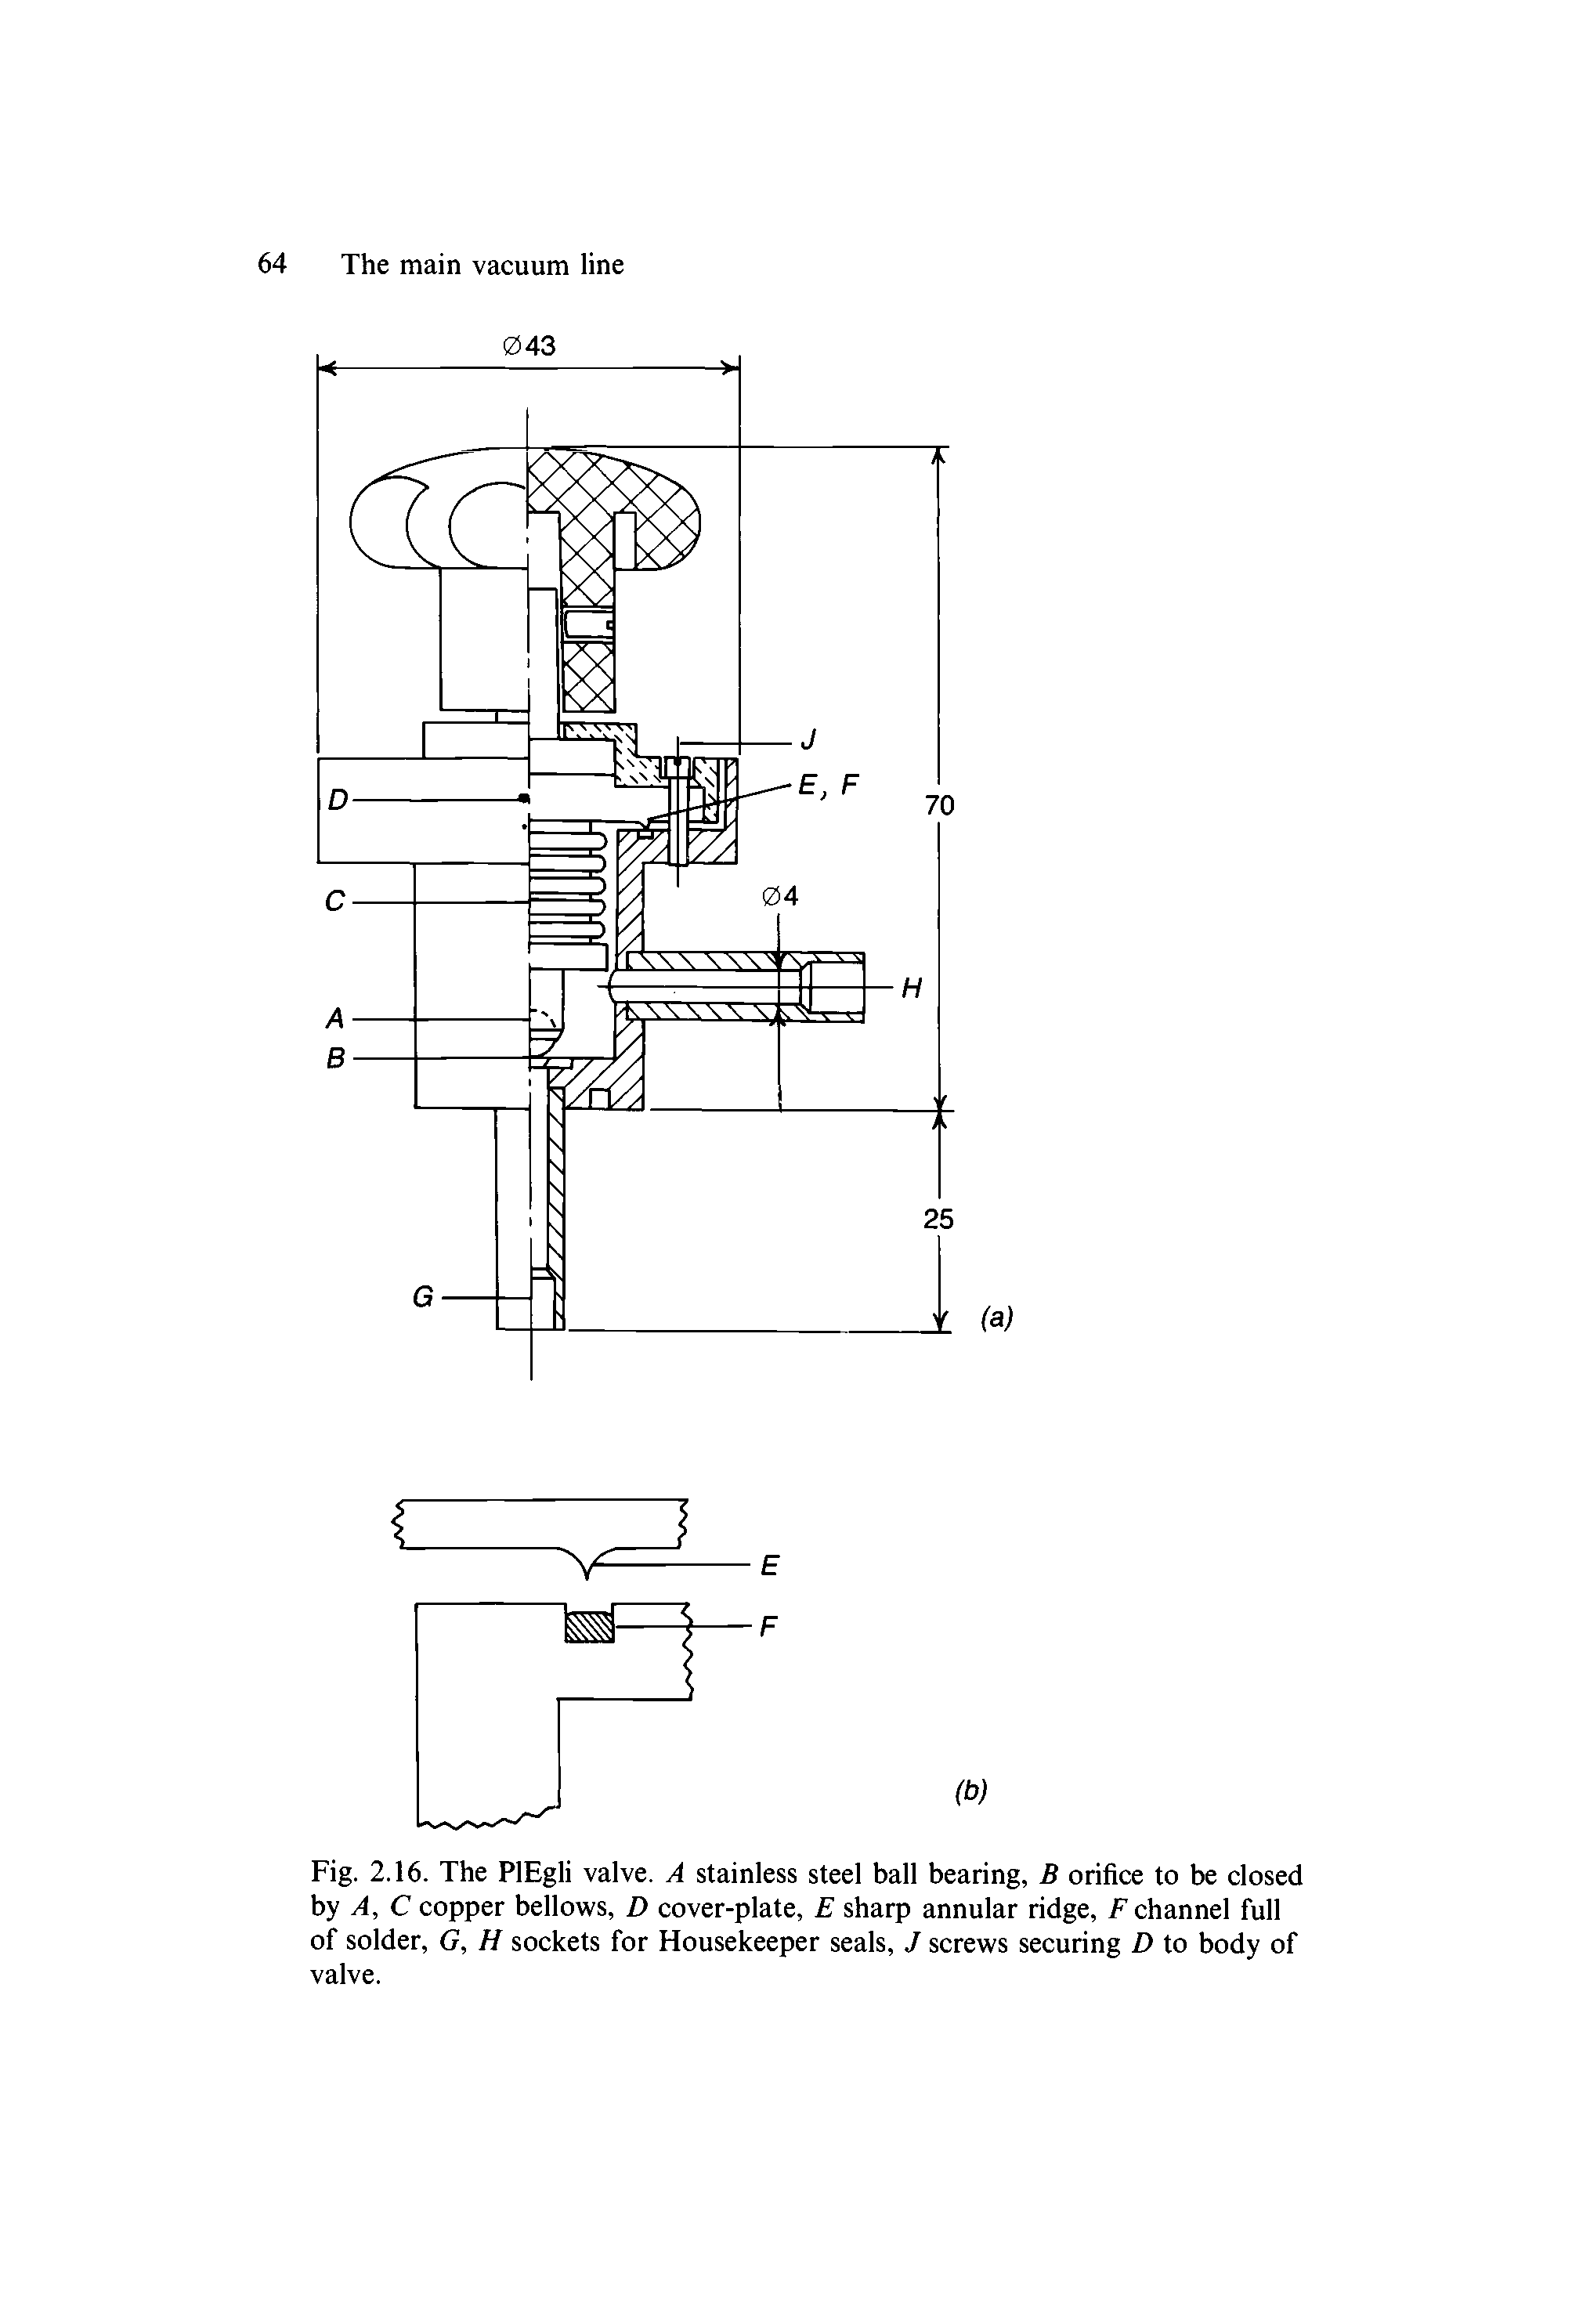 Fig. 2.16. The PlEgli valve. A stainless steel ball bearing, B orifice to be closed by A, C copper bellows, D cover-plate, E sharp annular ridge, F channel full of solder, G, H sockets for Housekeeper seals, J screws securing D to body of valve.